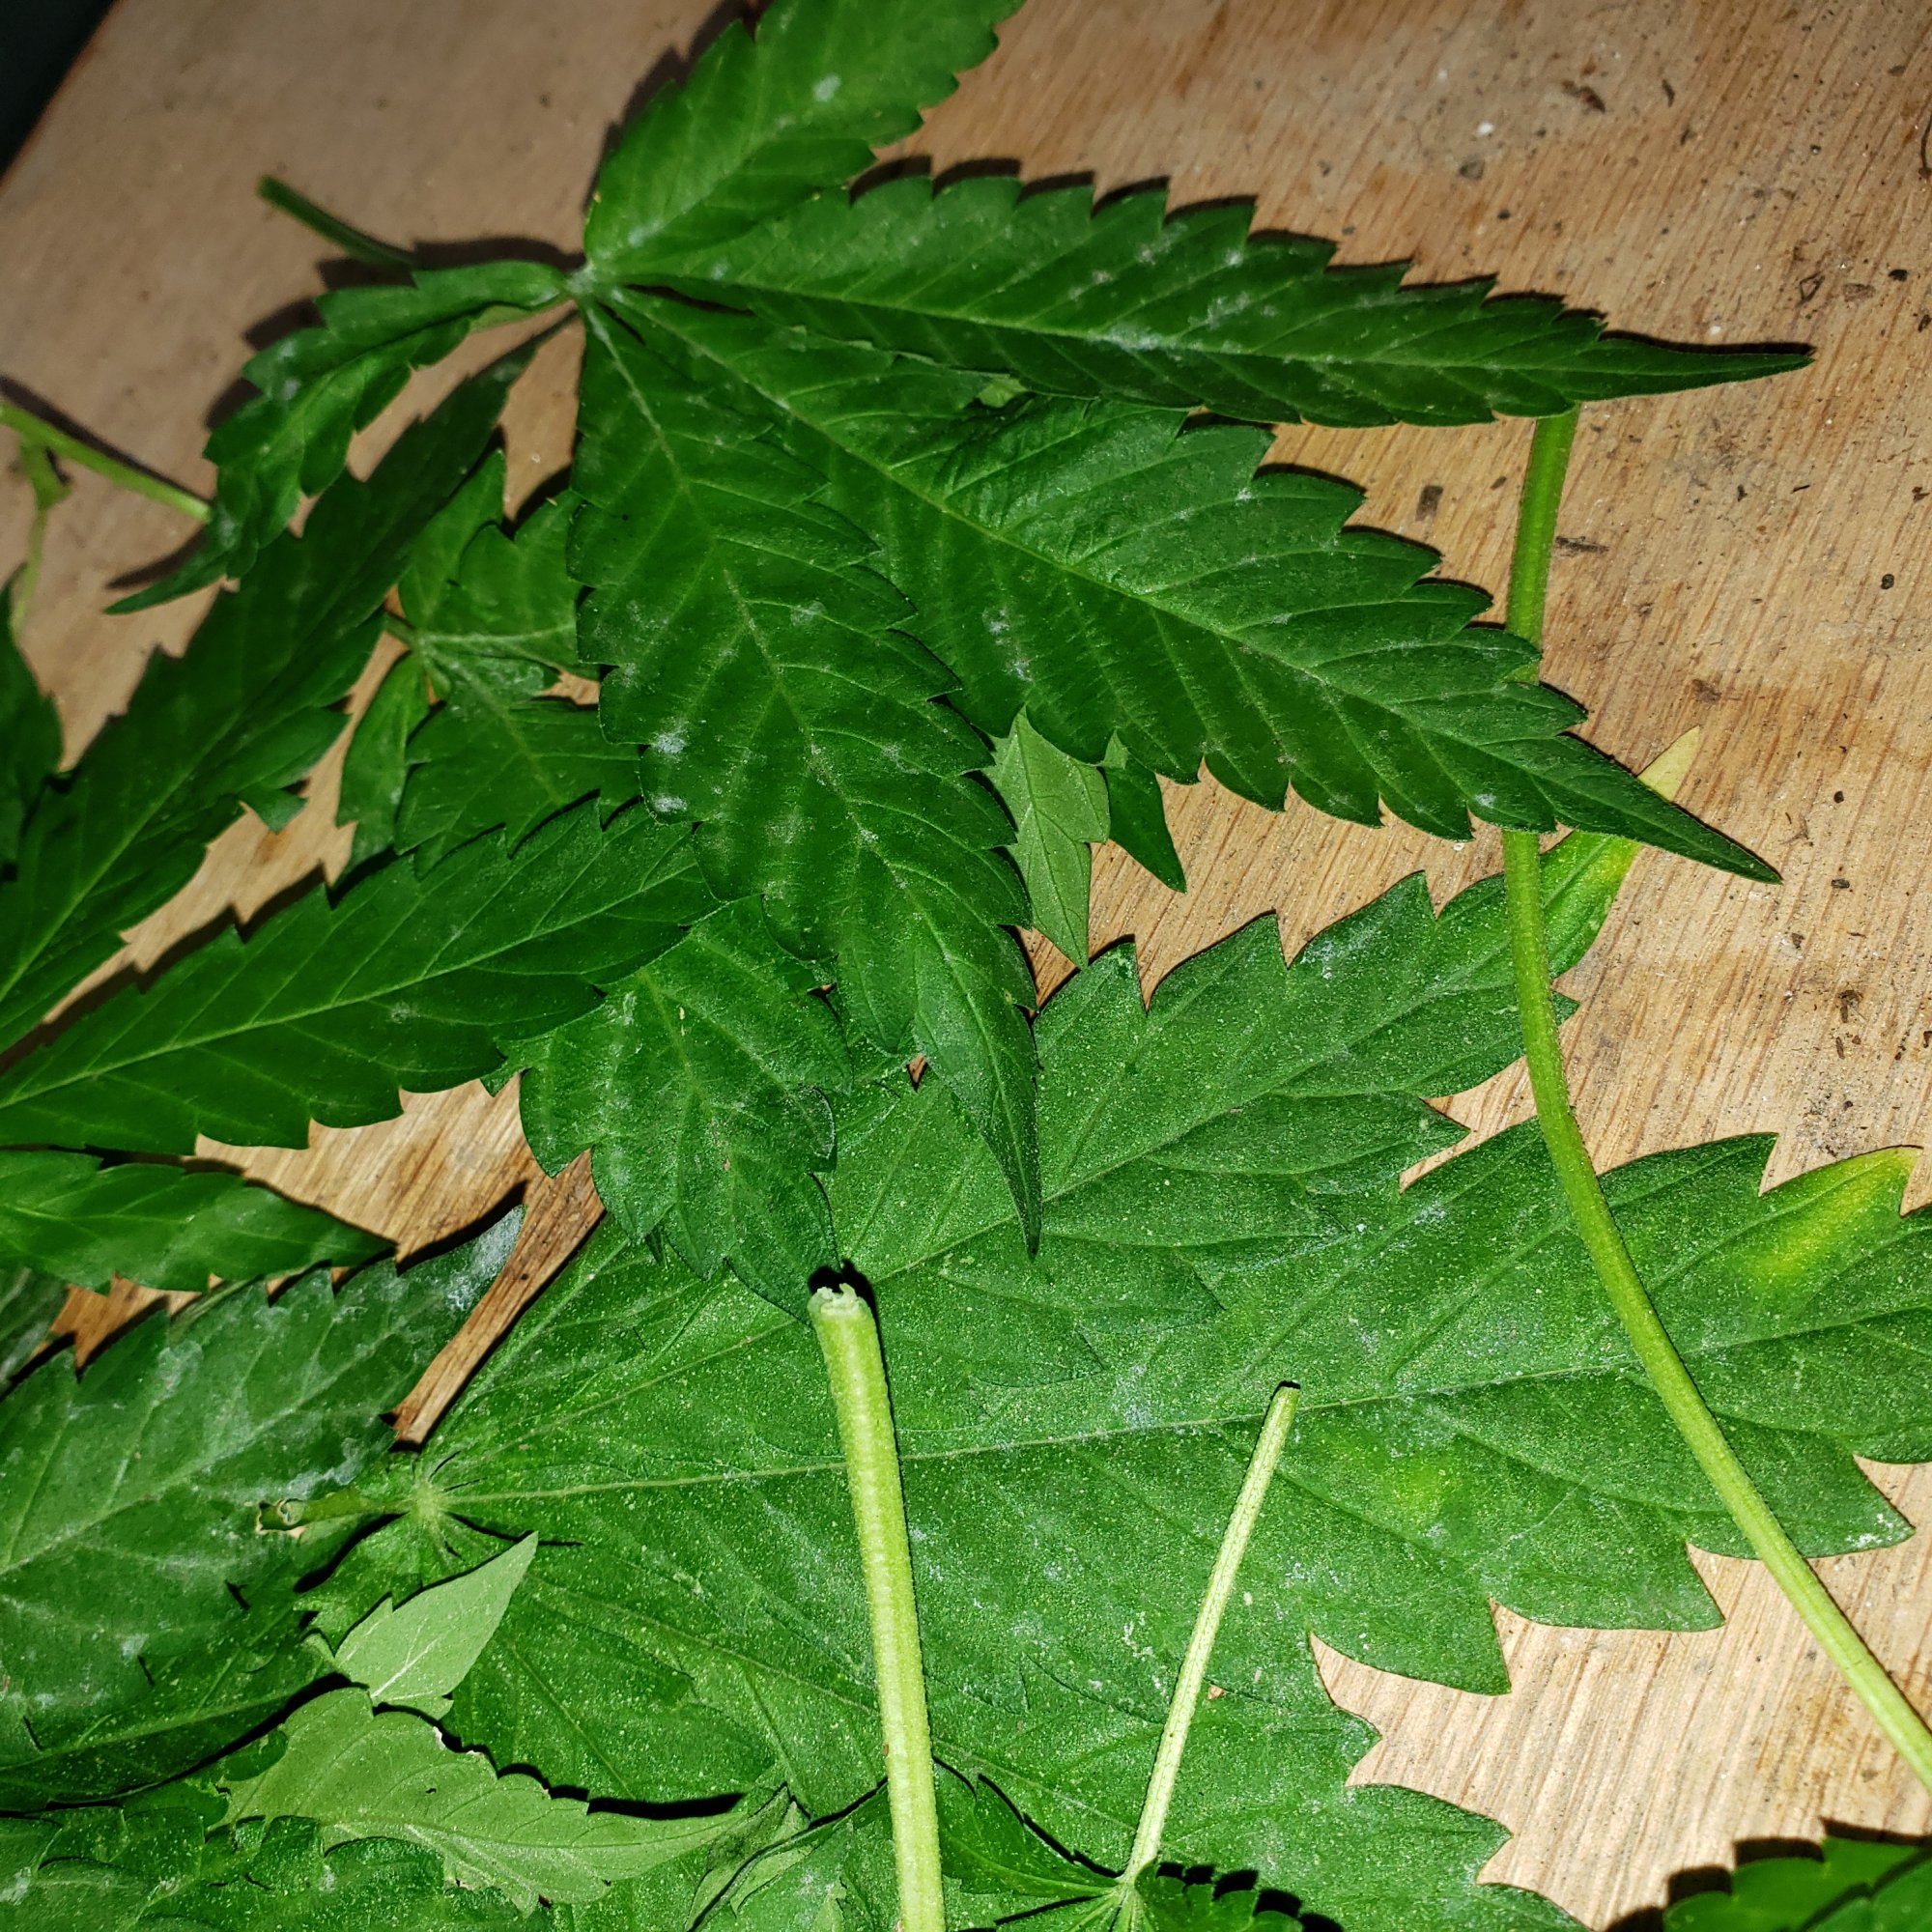 Having mildew or molding issue in the soil and now it is appearing on the leaves 5